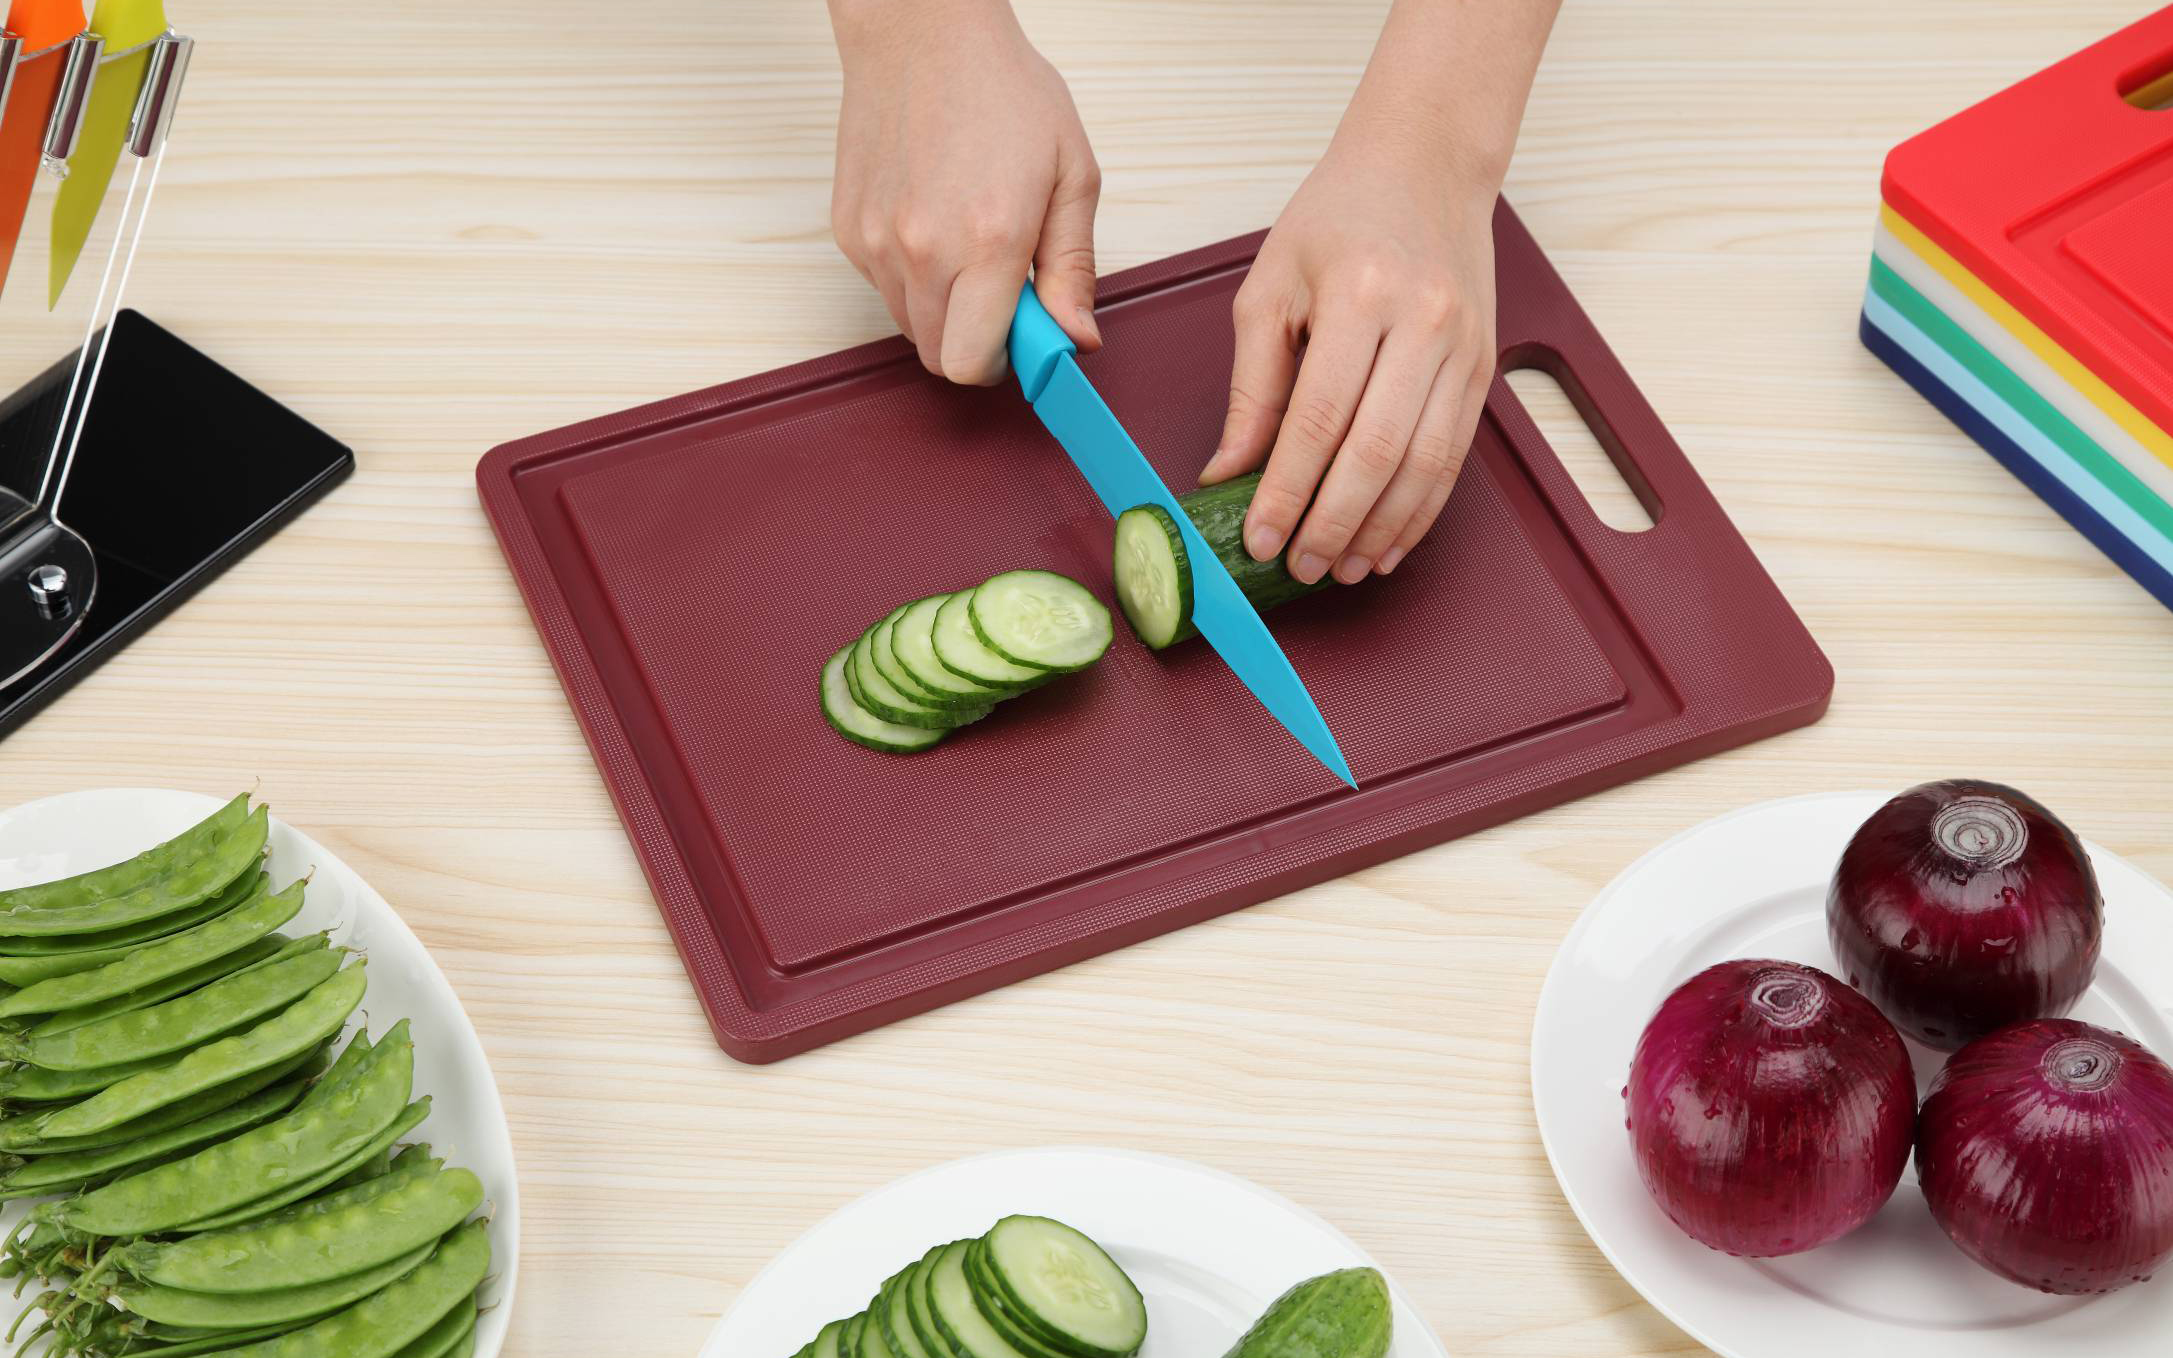 SUNNEX Colour-coded chopping boards